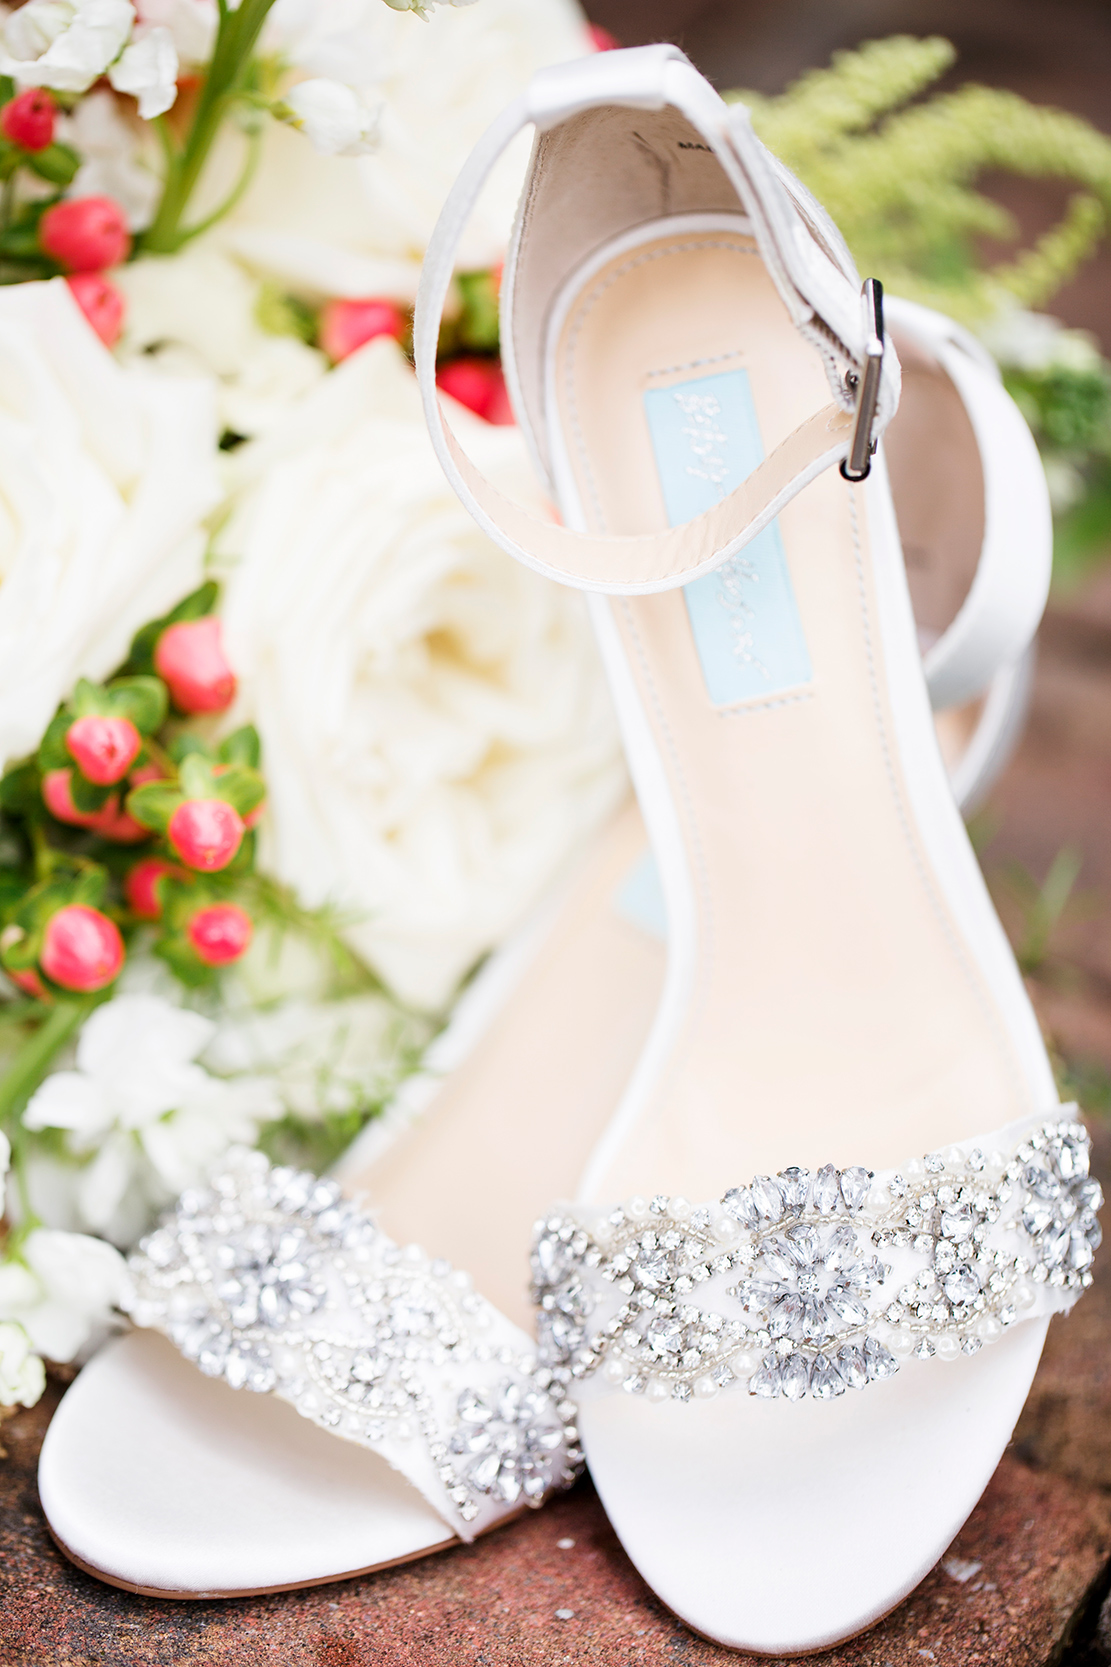 Finding the Shoe that Fits Your Wedding - Image Property of www.j-dphoto.com